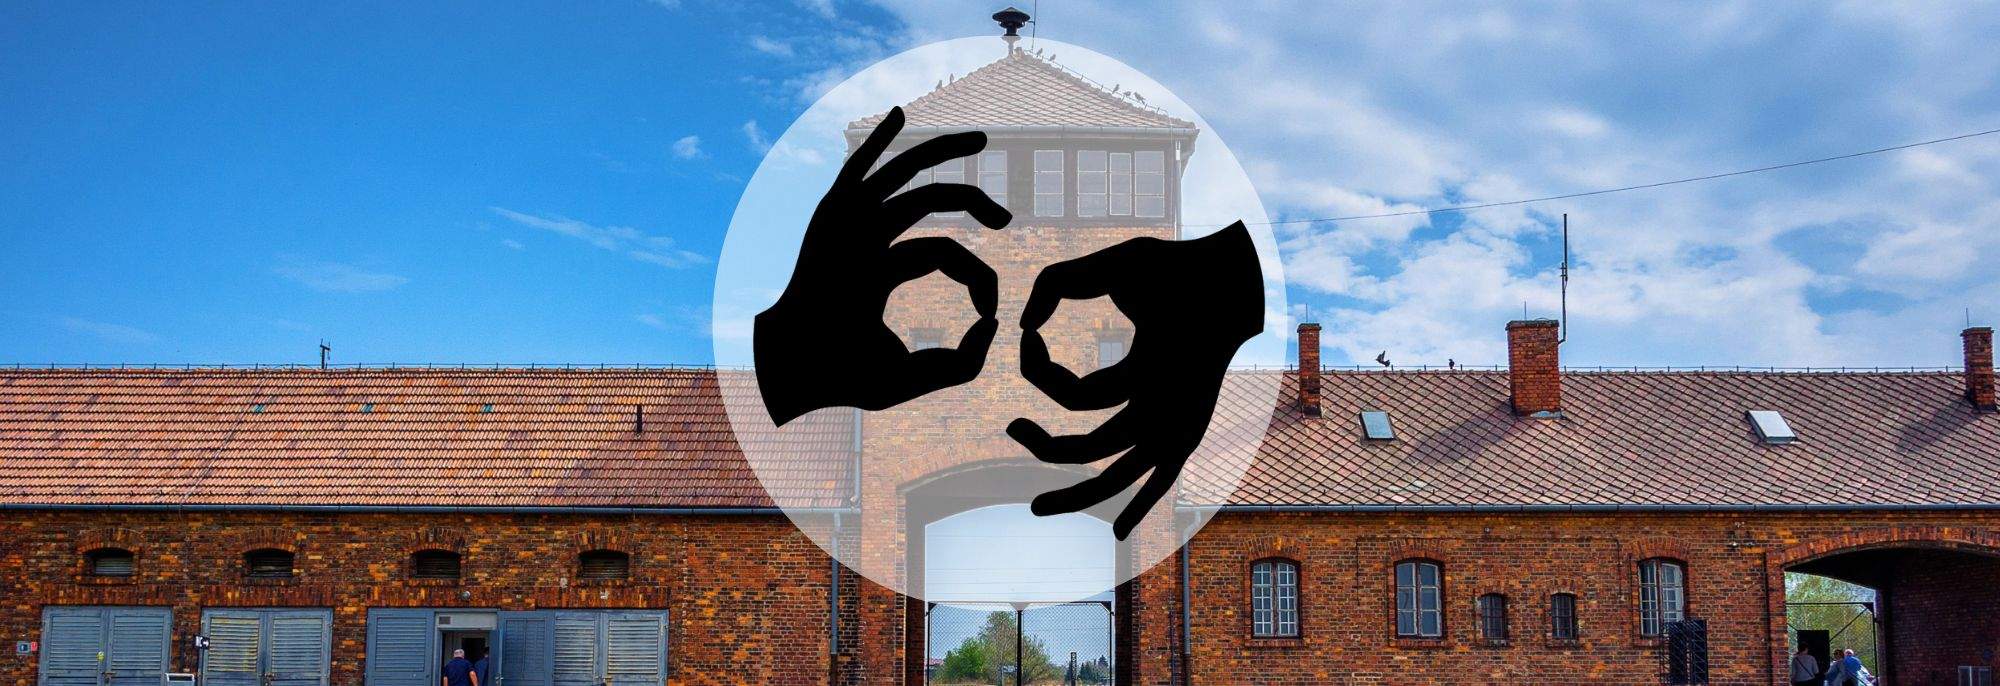 Auschwitz Memorial Site increases accessibility for the hearing impaired